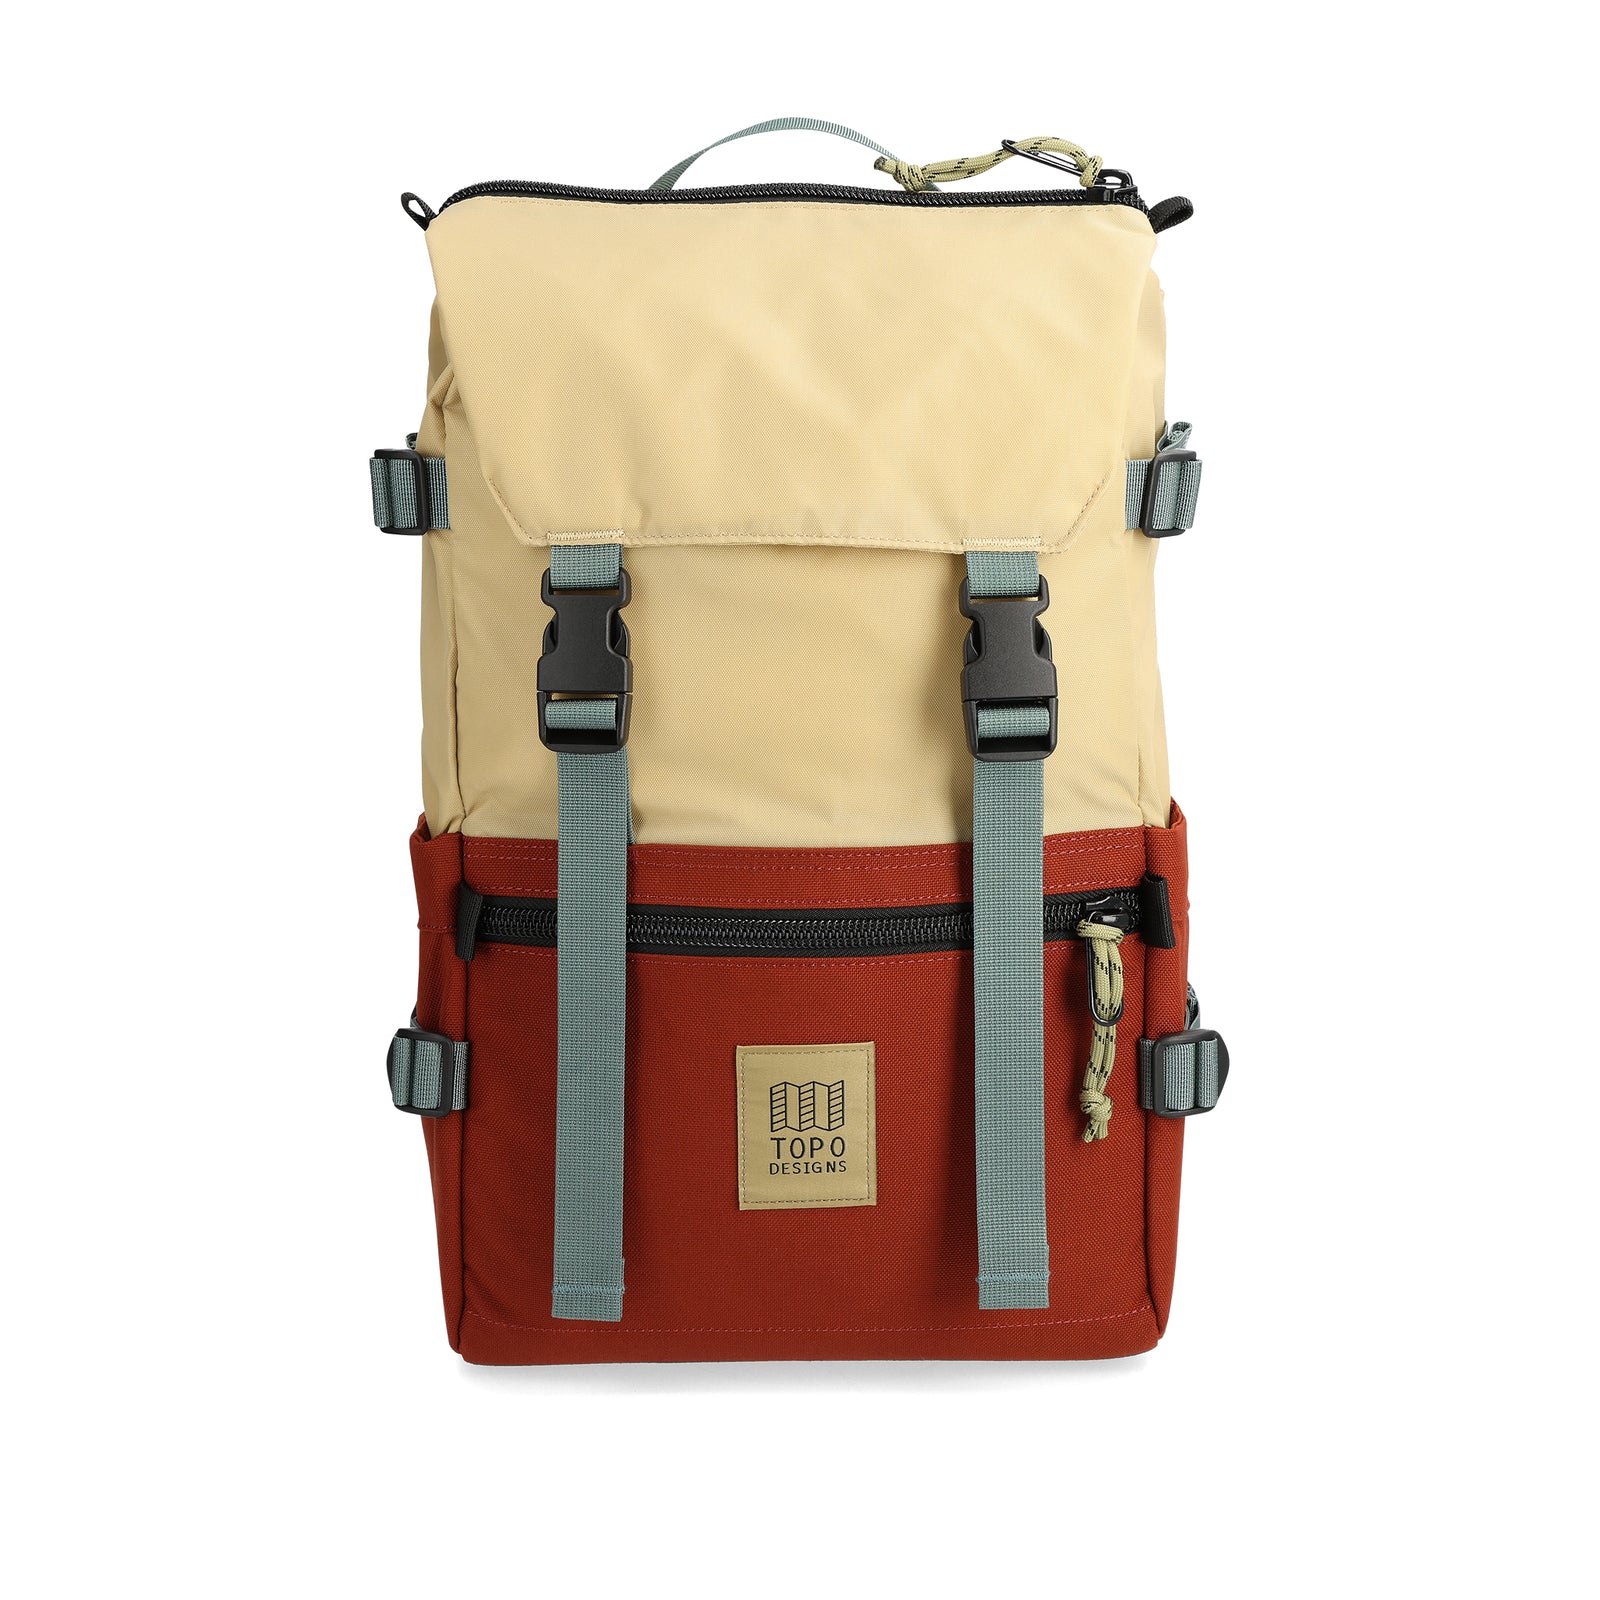 Front View of Topo Designs Rover Pack Classic in "Sahara / Fire Brick"